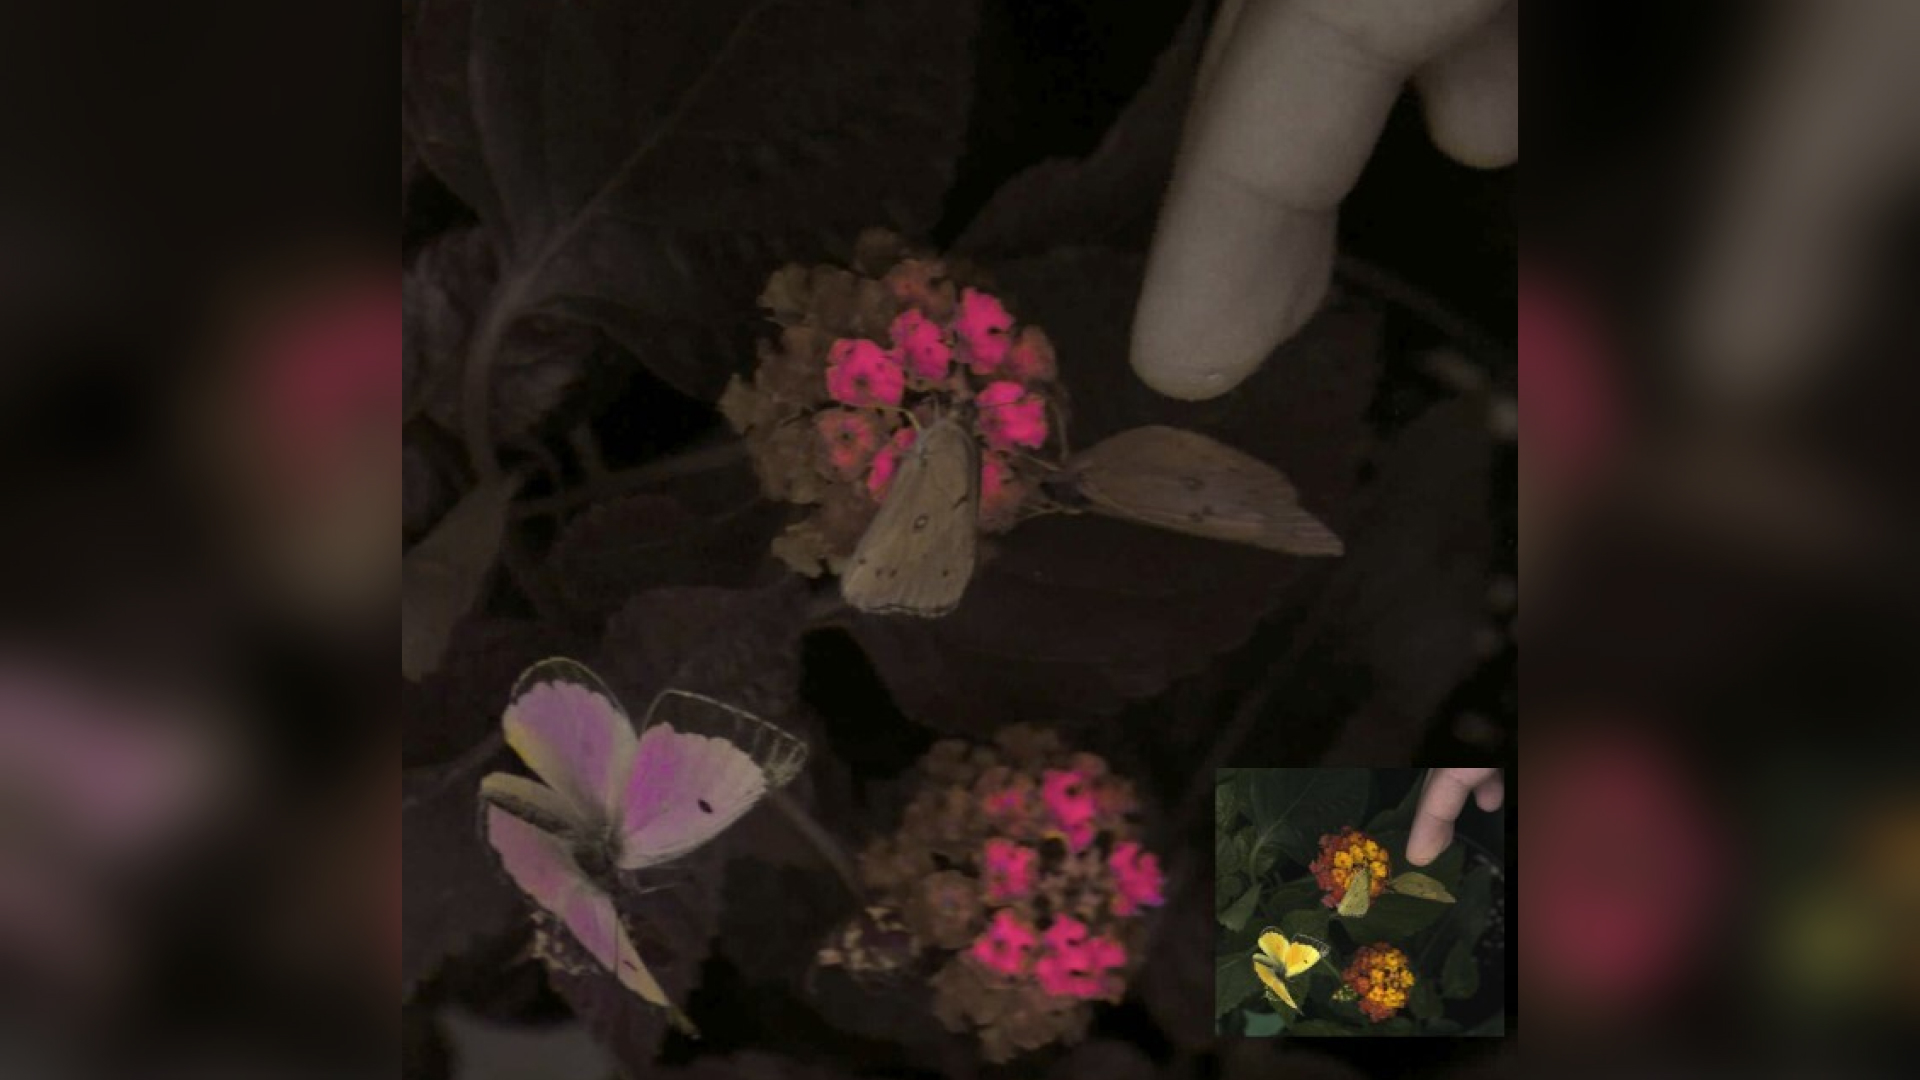 An image comparing the view of butterflies and flowers with the new camera system.